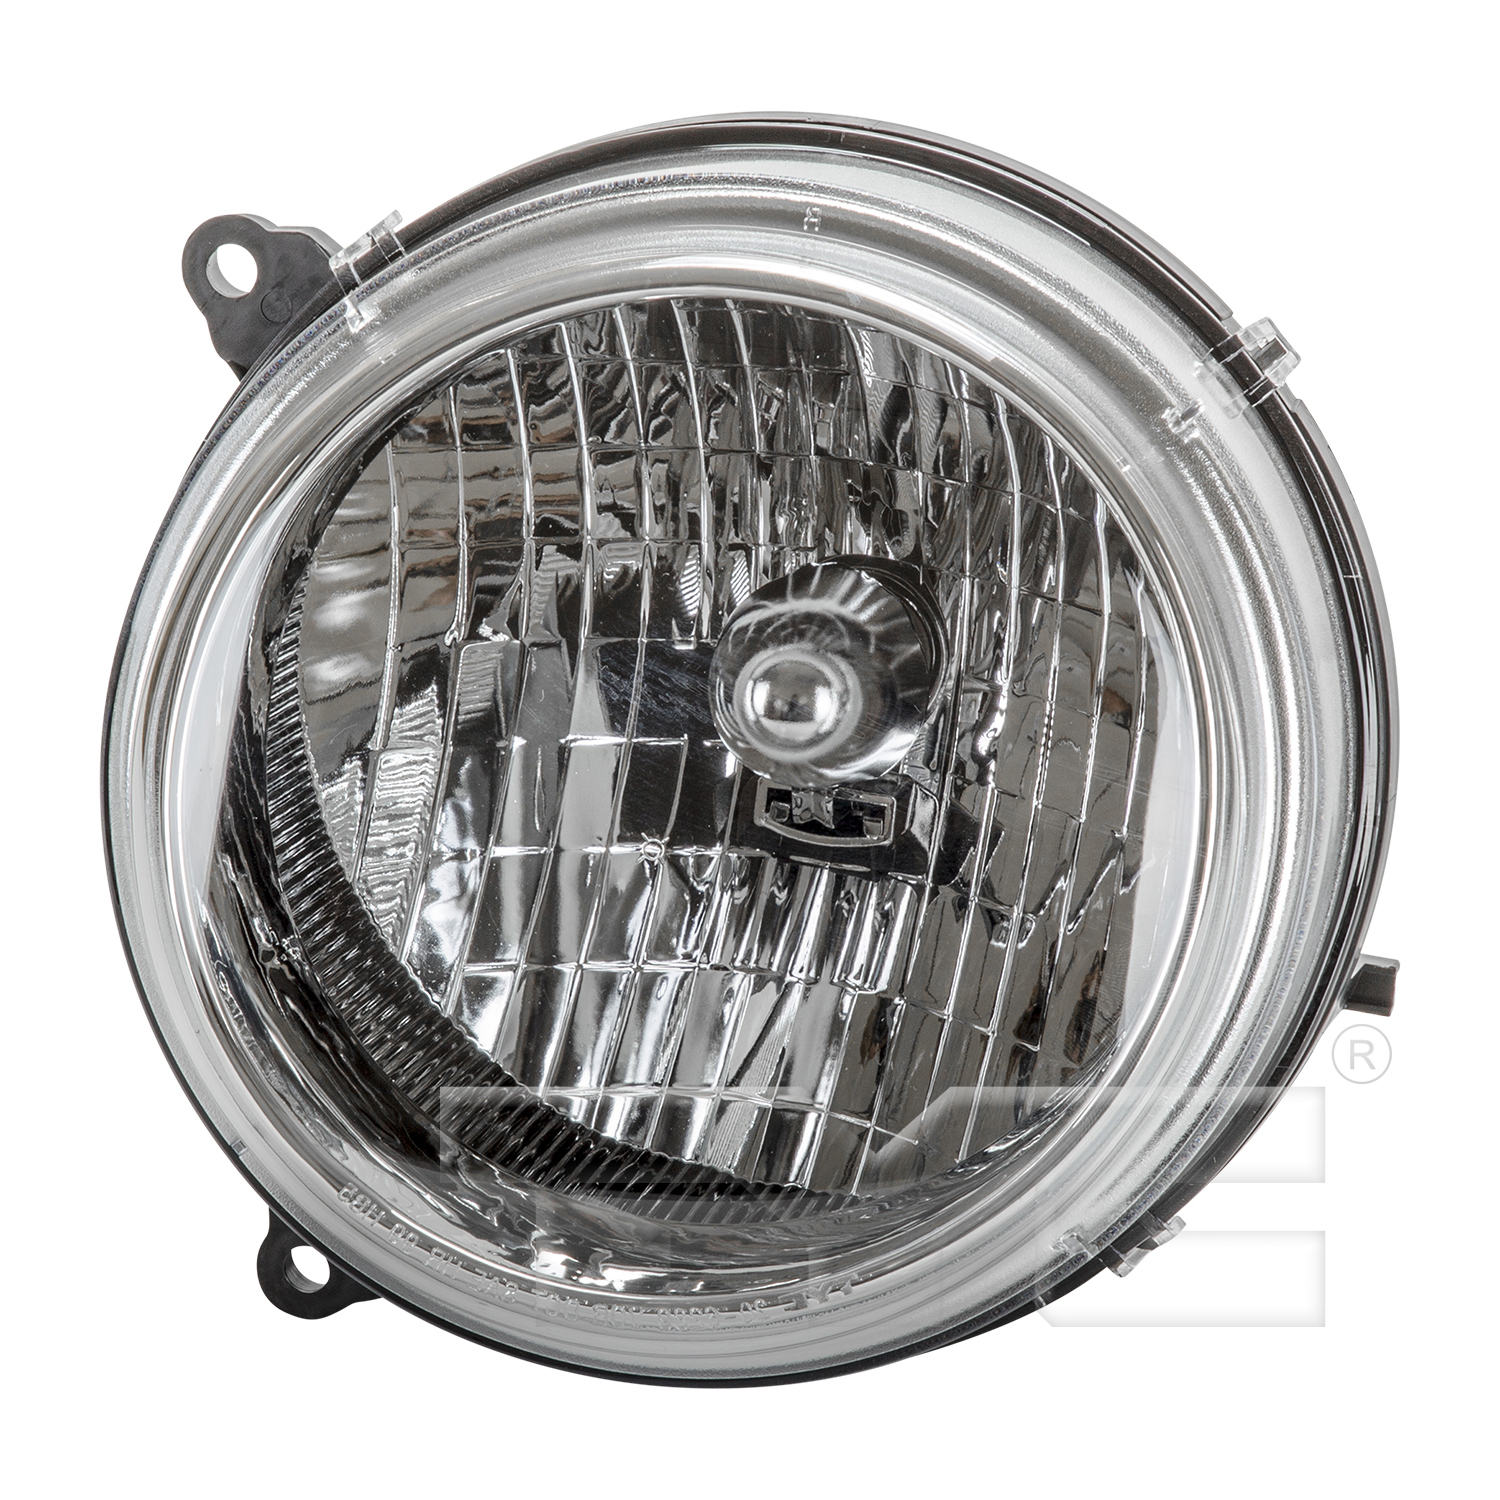 Aftermarket HEADLIGHTS for JEEP - LIBERTY, LIBERTY,02-03,LT Headlamp assy composite